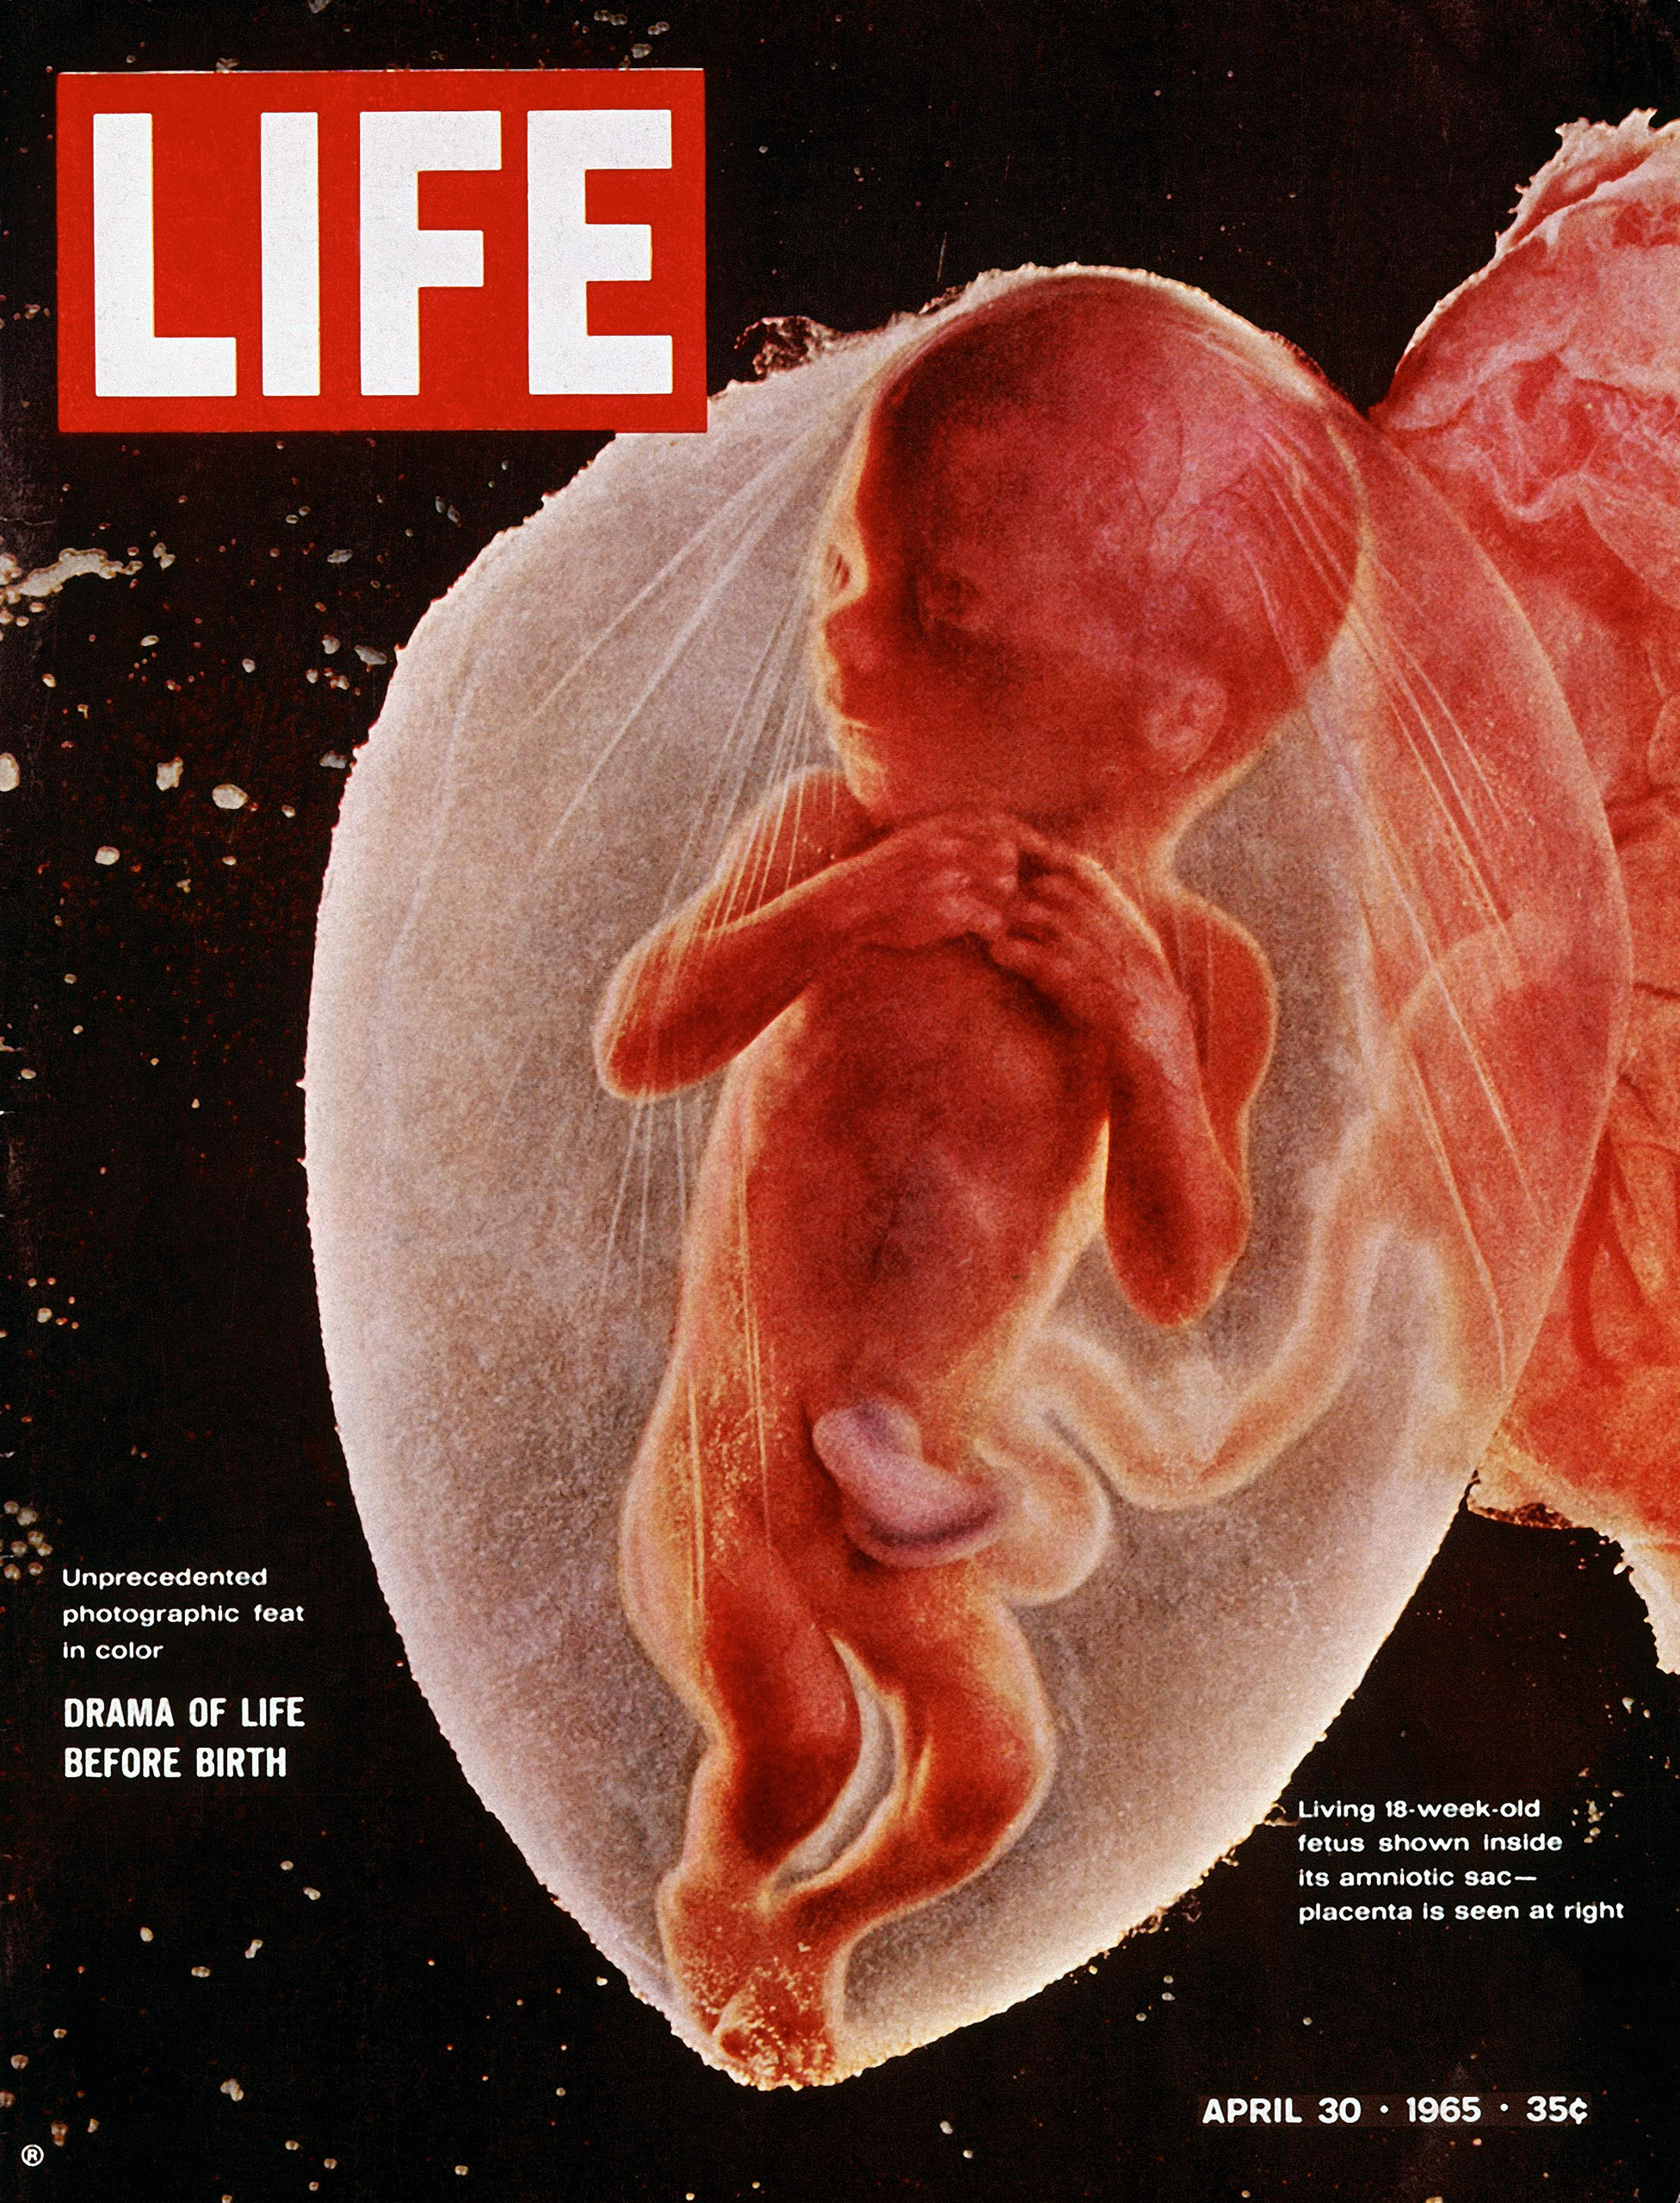 The cover of LIFE Magazine features a photograph of an 18-week-old fetus inside its amniotic sac, April 30, 1965. (Lennart Nilsson—LIFE Magazine)